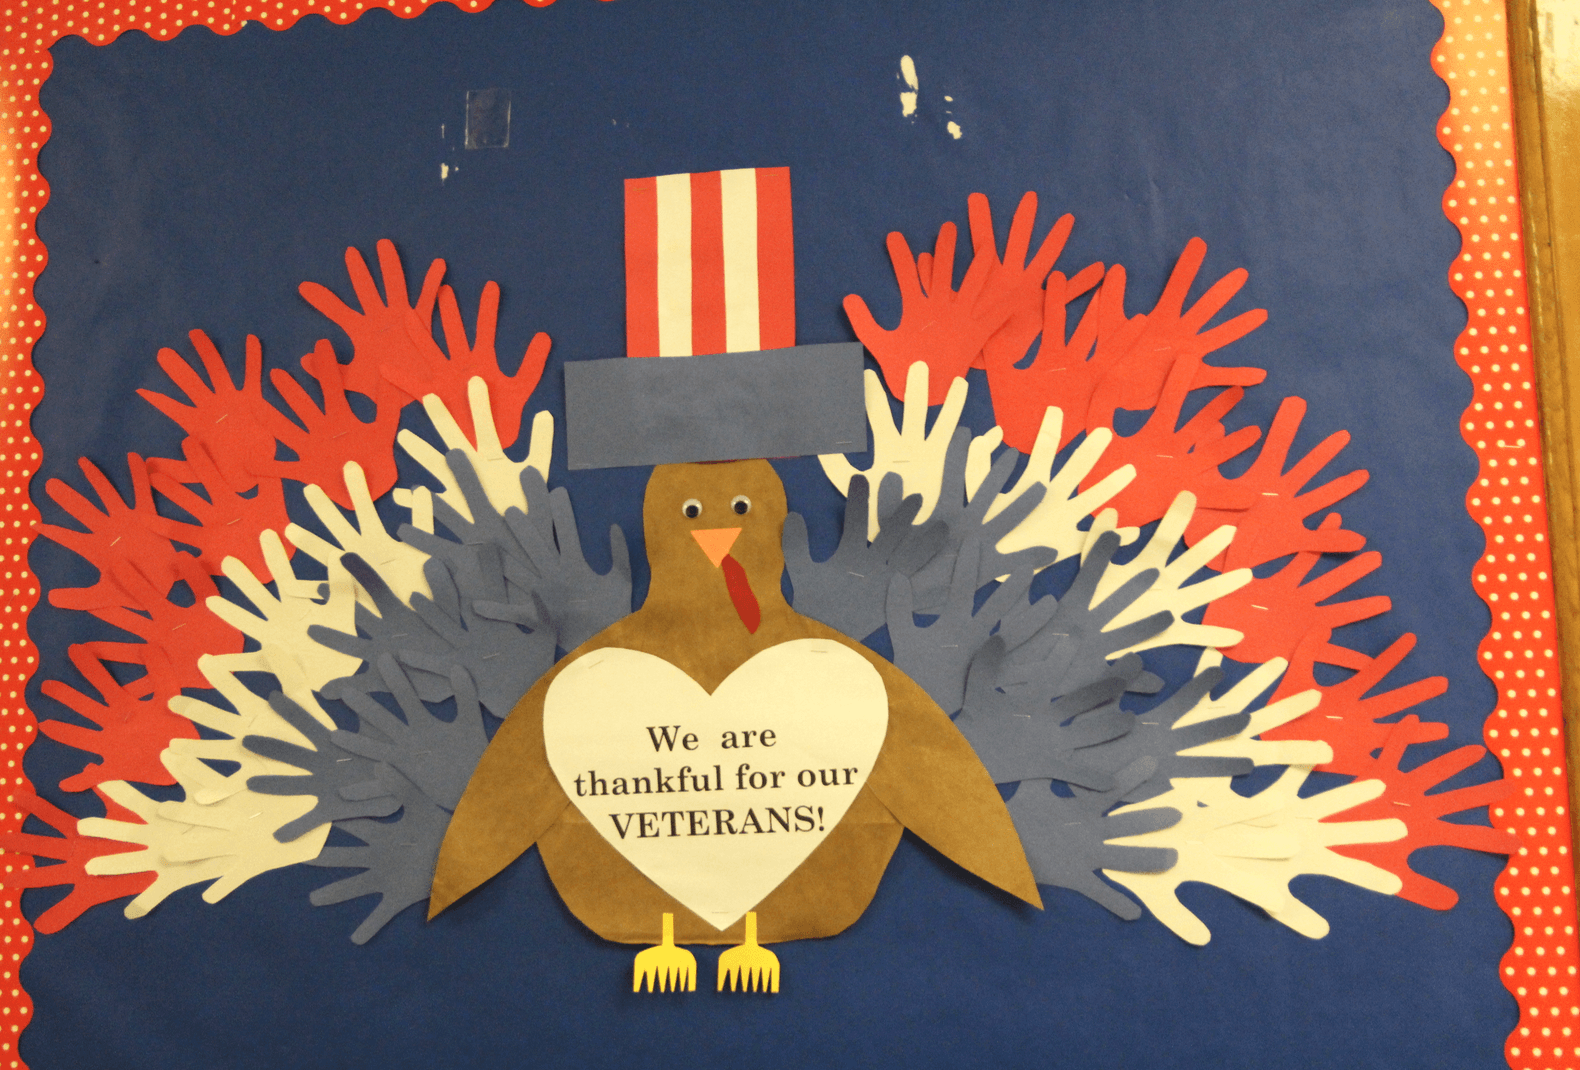 Bulletin boards and displays throughout North Mianus School gave tribute to veterans. Nov 9, 2018 Photo: Leslie Yager